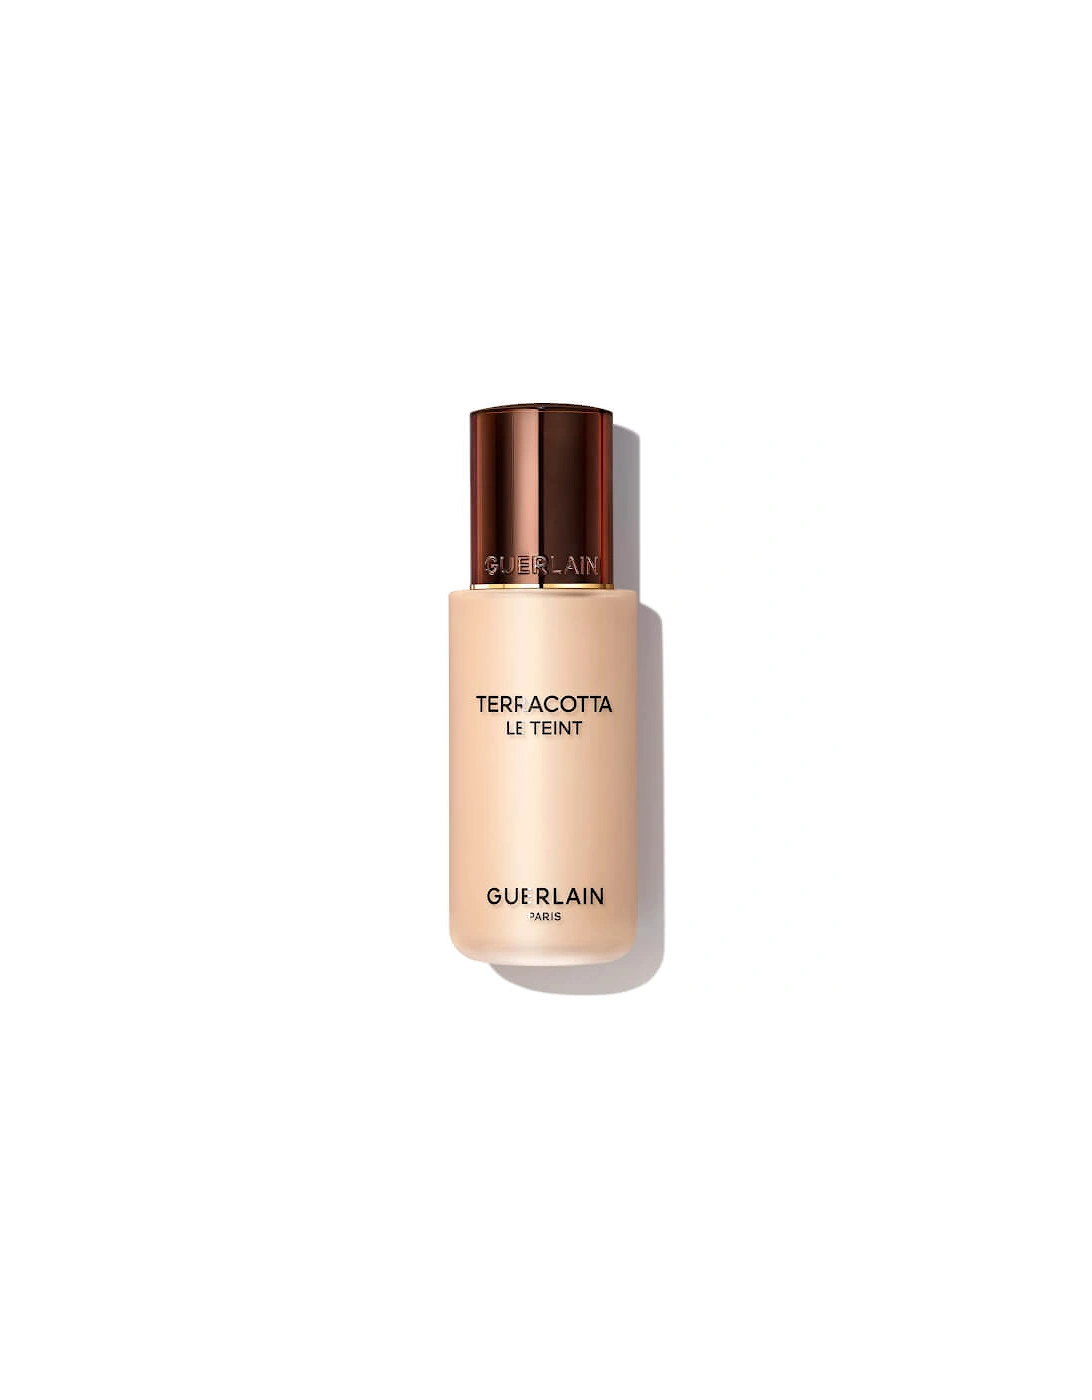 Terracotta Le Teint Healthy Glow Natural Perfection Foundation - 1N, 2 of 1